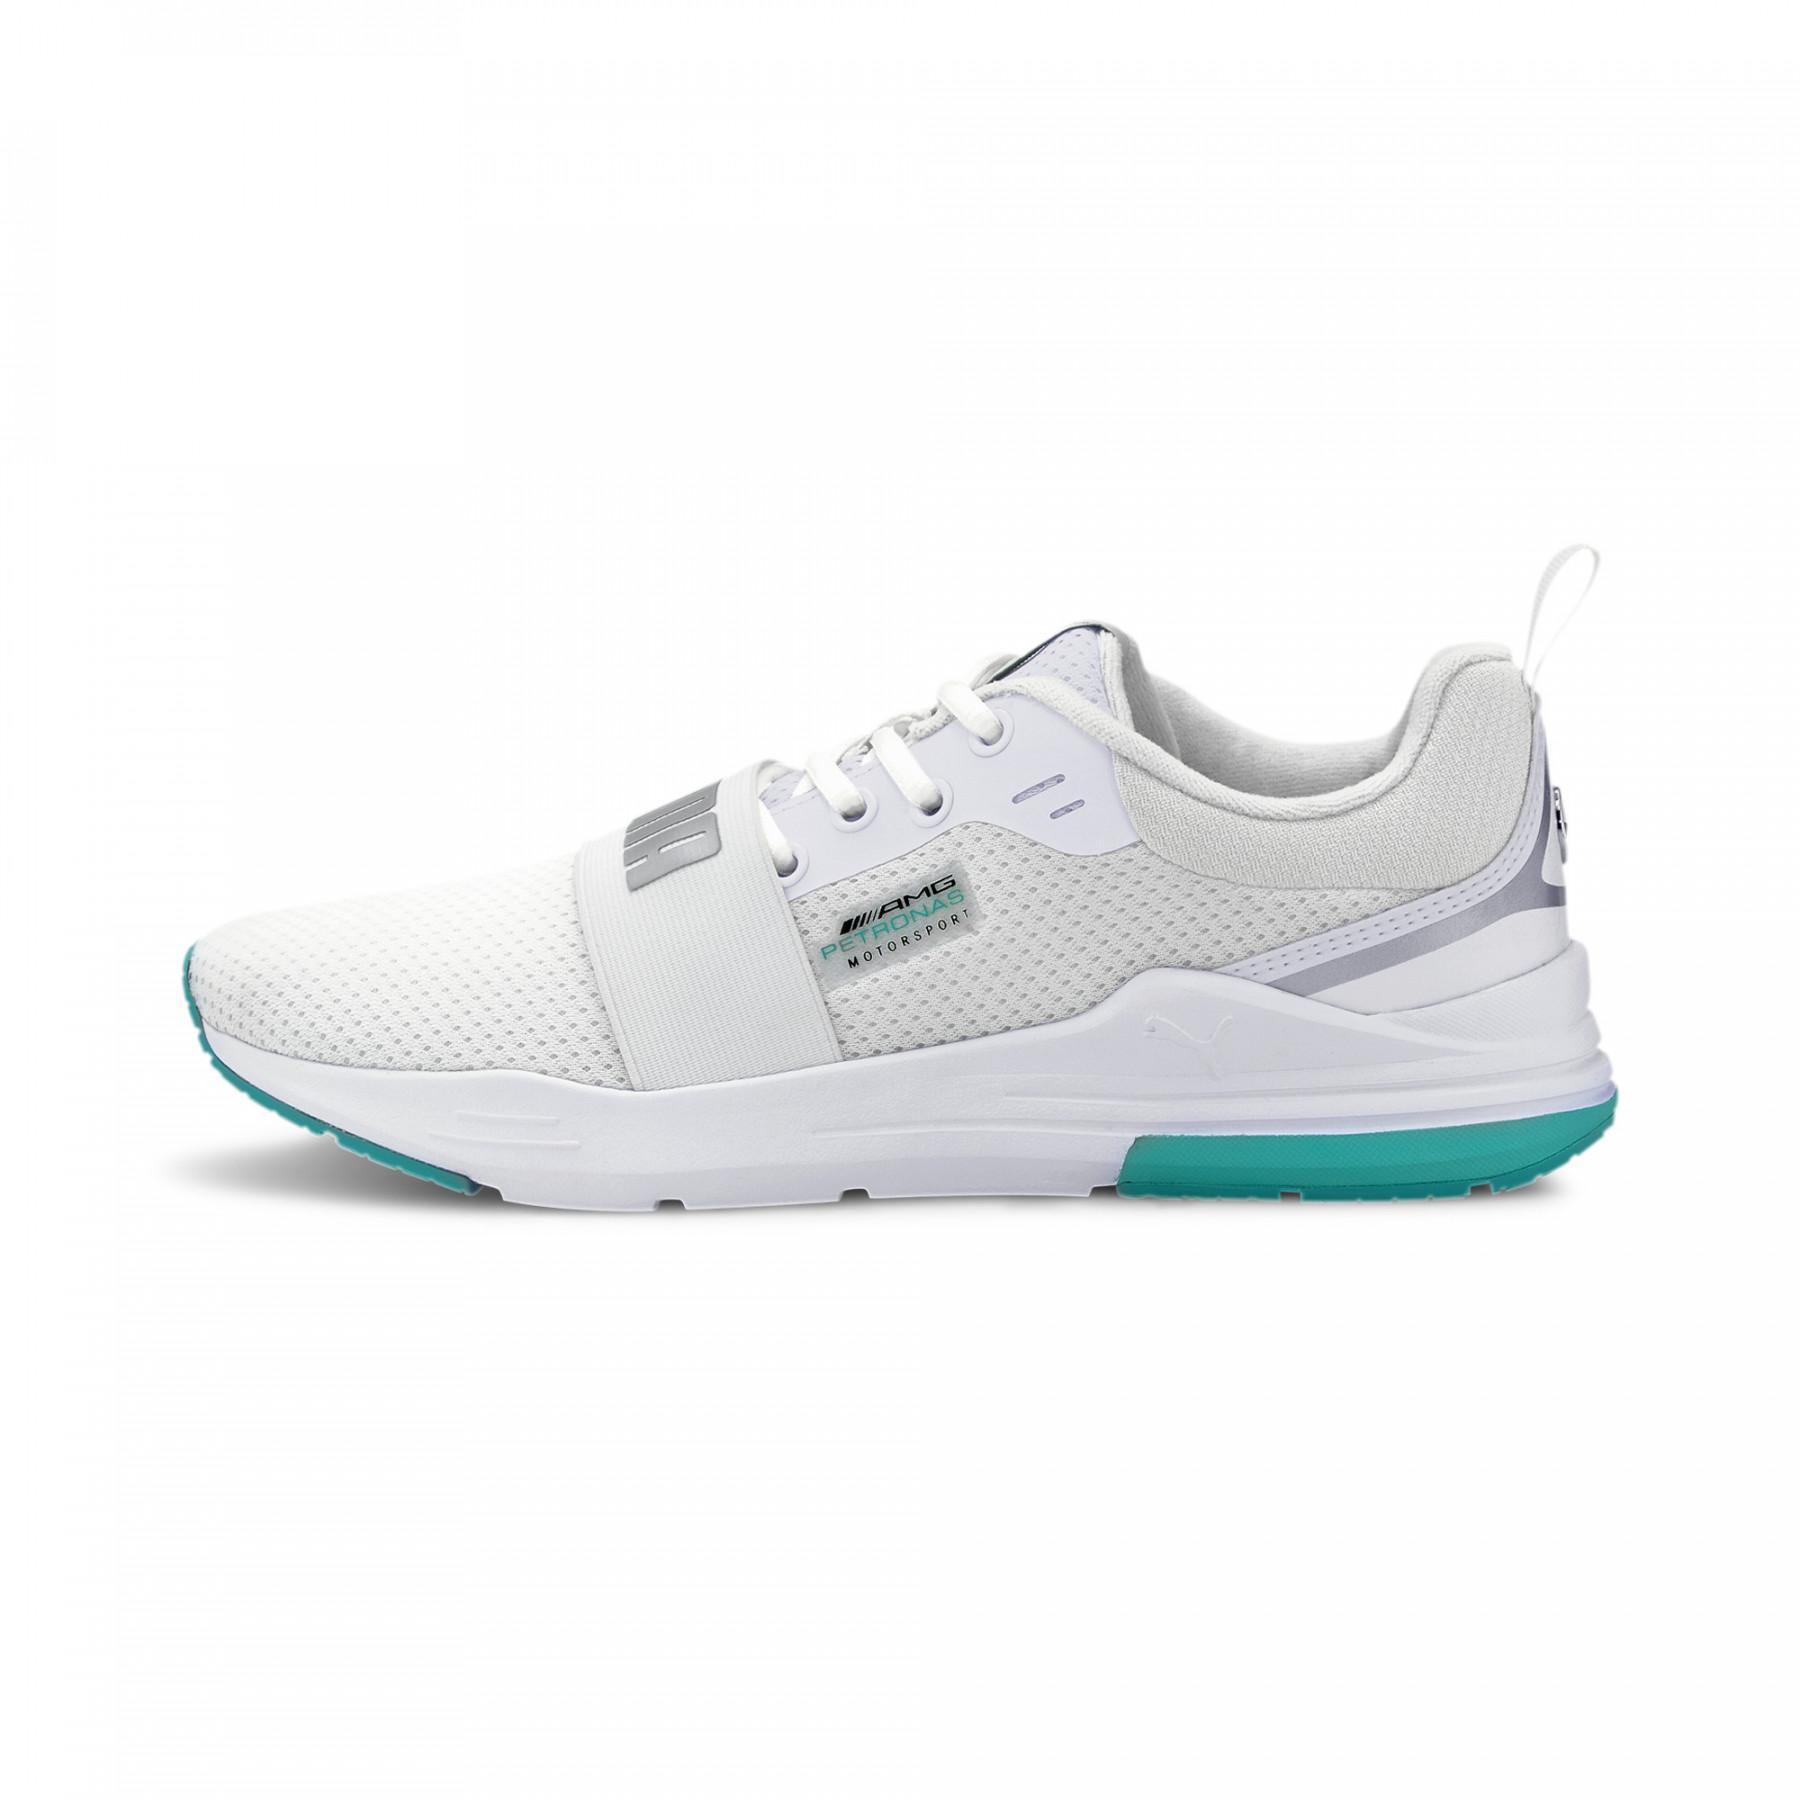 mercedes-amg petronas wired run trainers